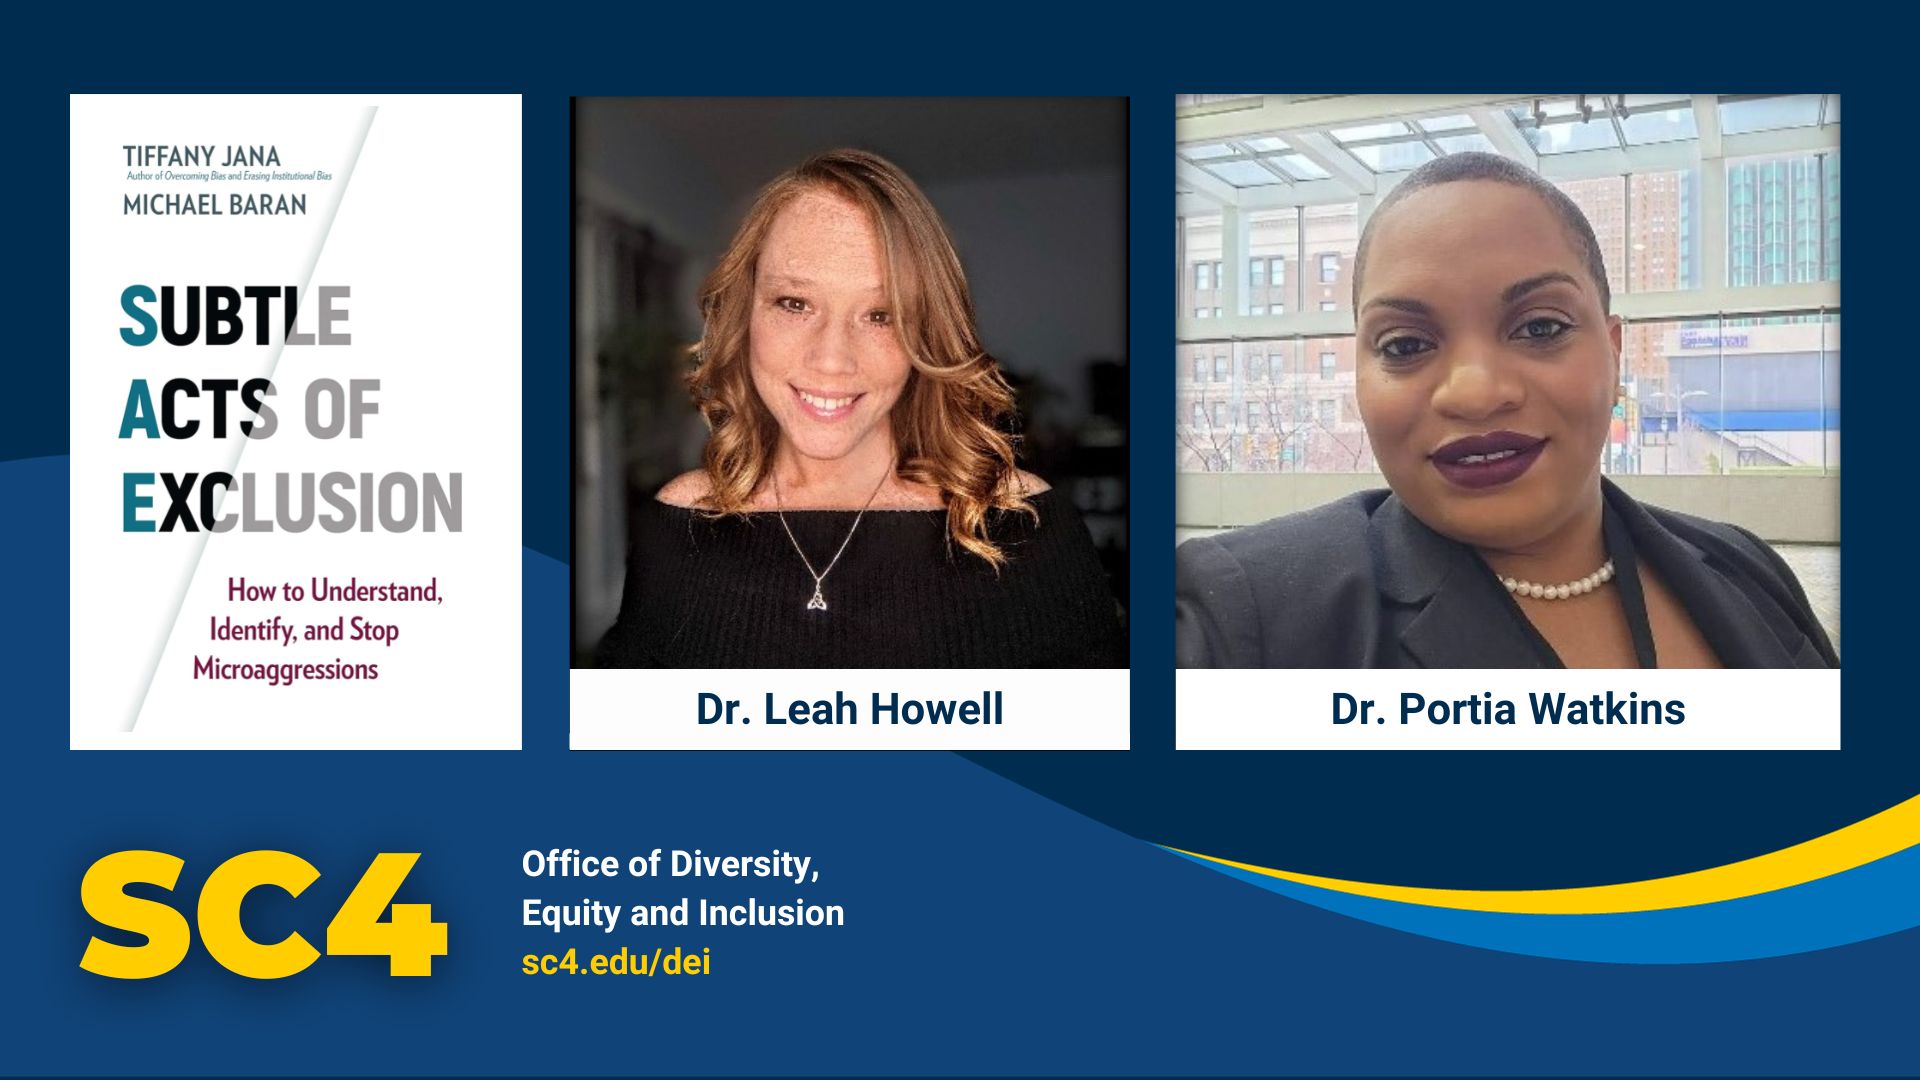 Dr. Leah Howell, director of Learning Design at Everspring, Inc., and Dr. Portia Watkins, Michigan State University director of Transitions and Transfer Student Success and a trainer of the Kingian Nonviolence Conflict Reconciliation program, will serve as facilitators for the "Subtle Acts of Exclusion" Nov. 17 event.